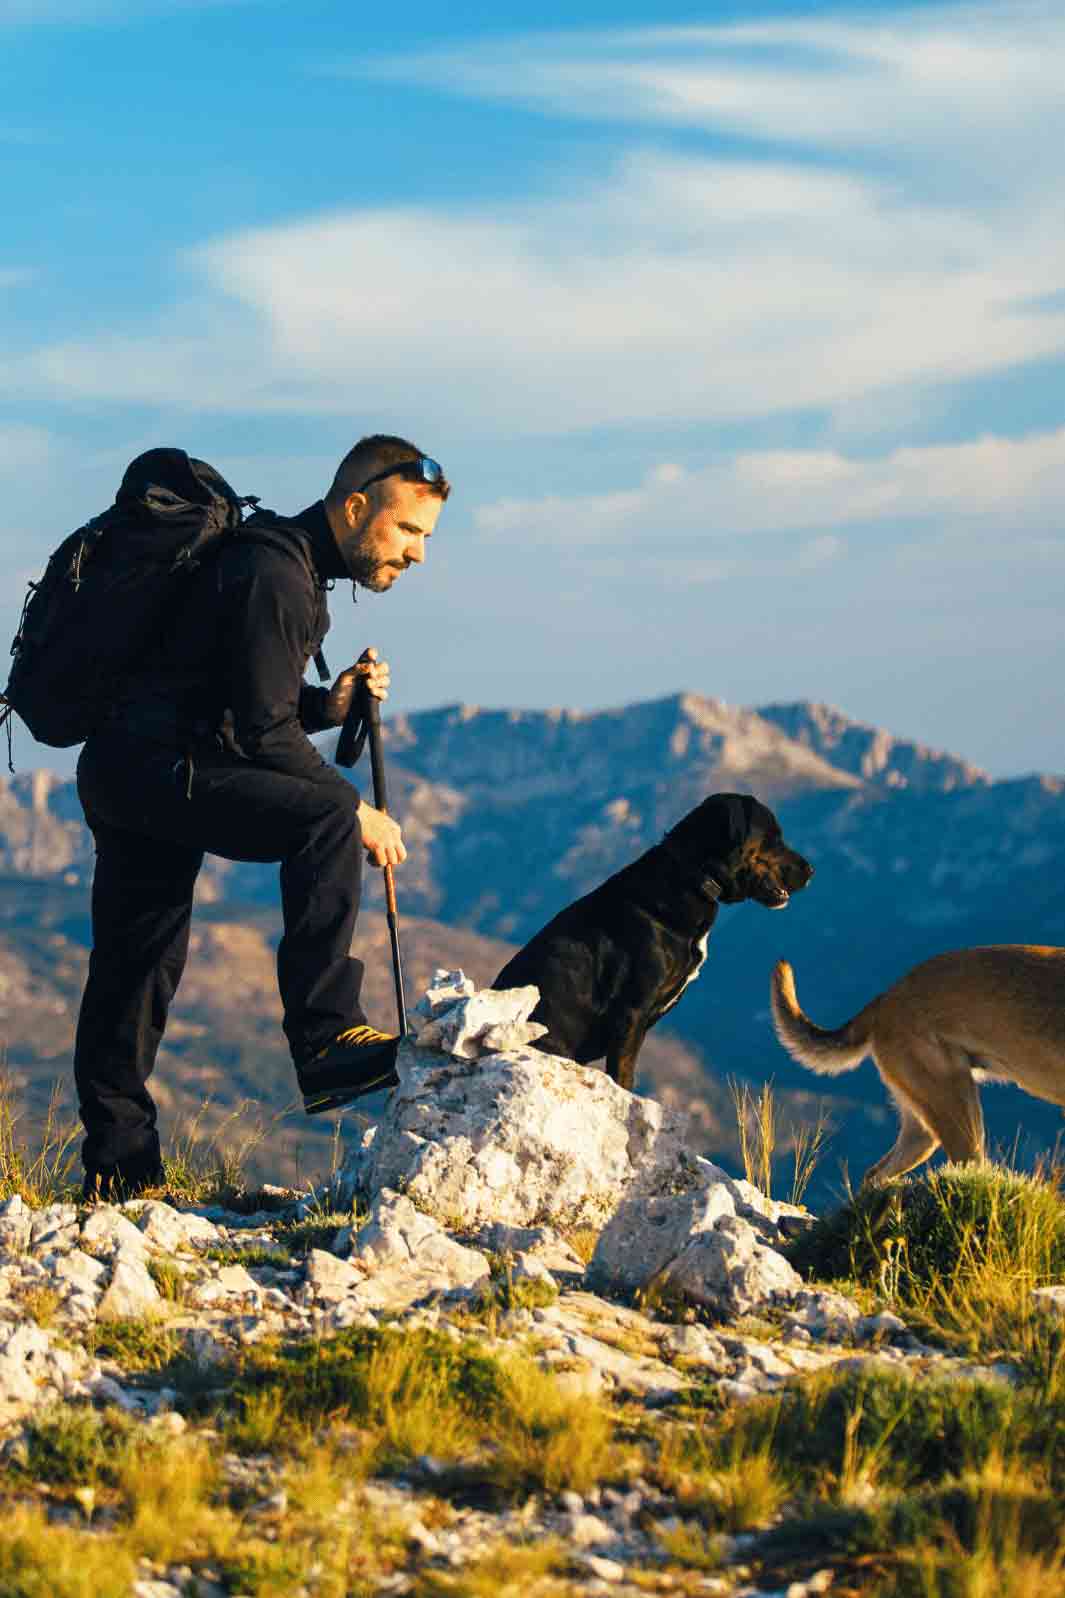 Backpacking, hiking, swimming and all the fun activities and things to do with your dog this Father's Day.